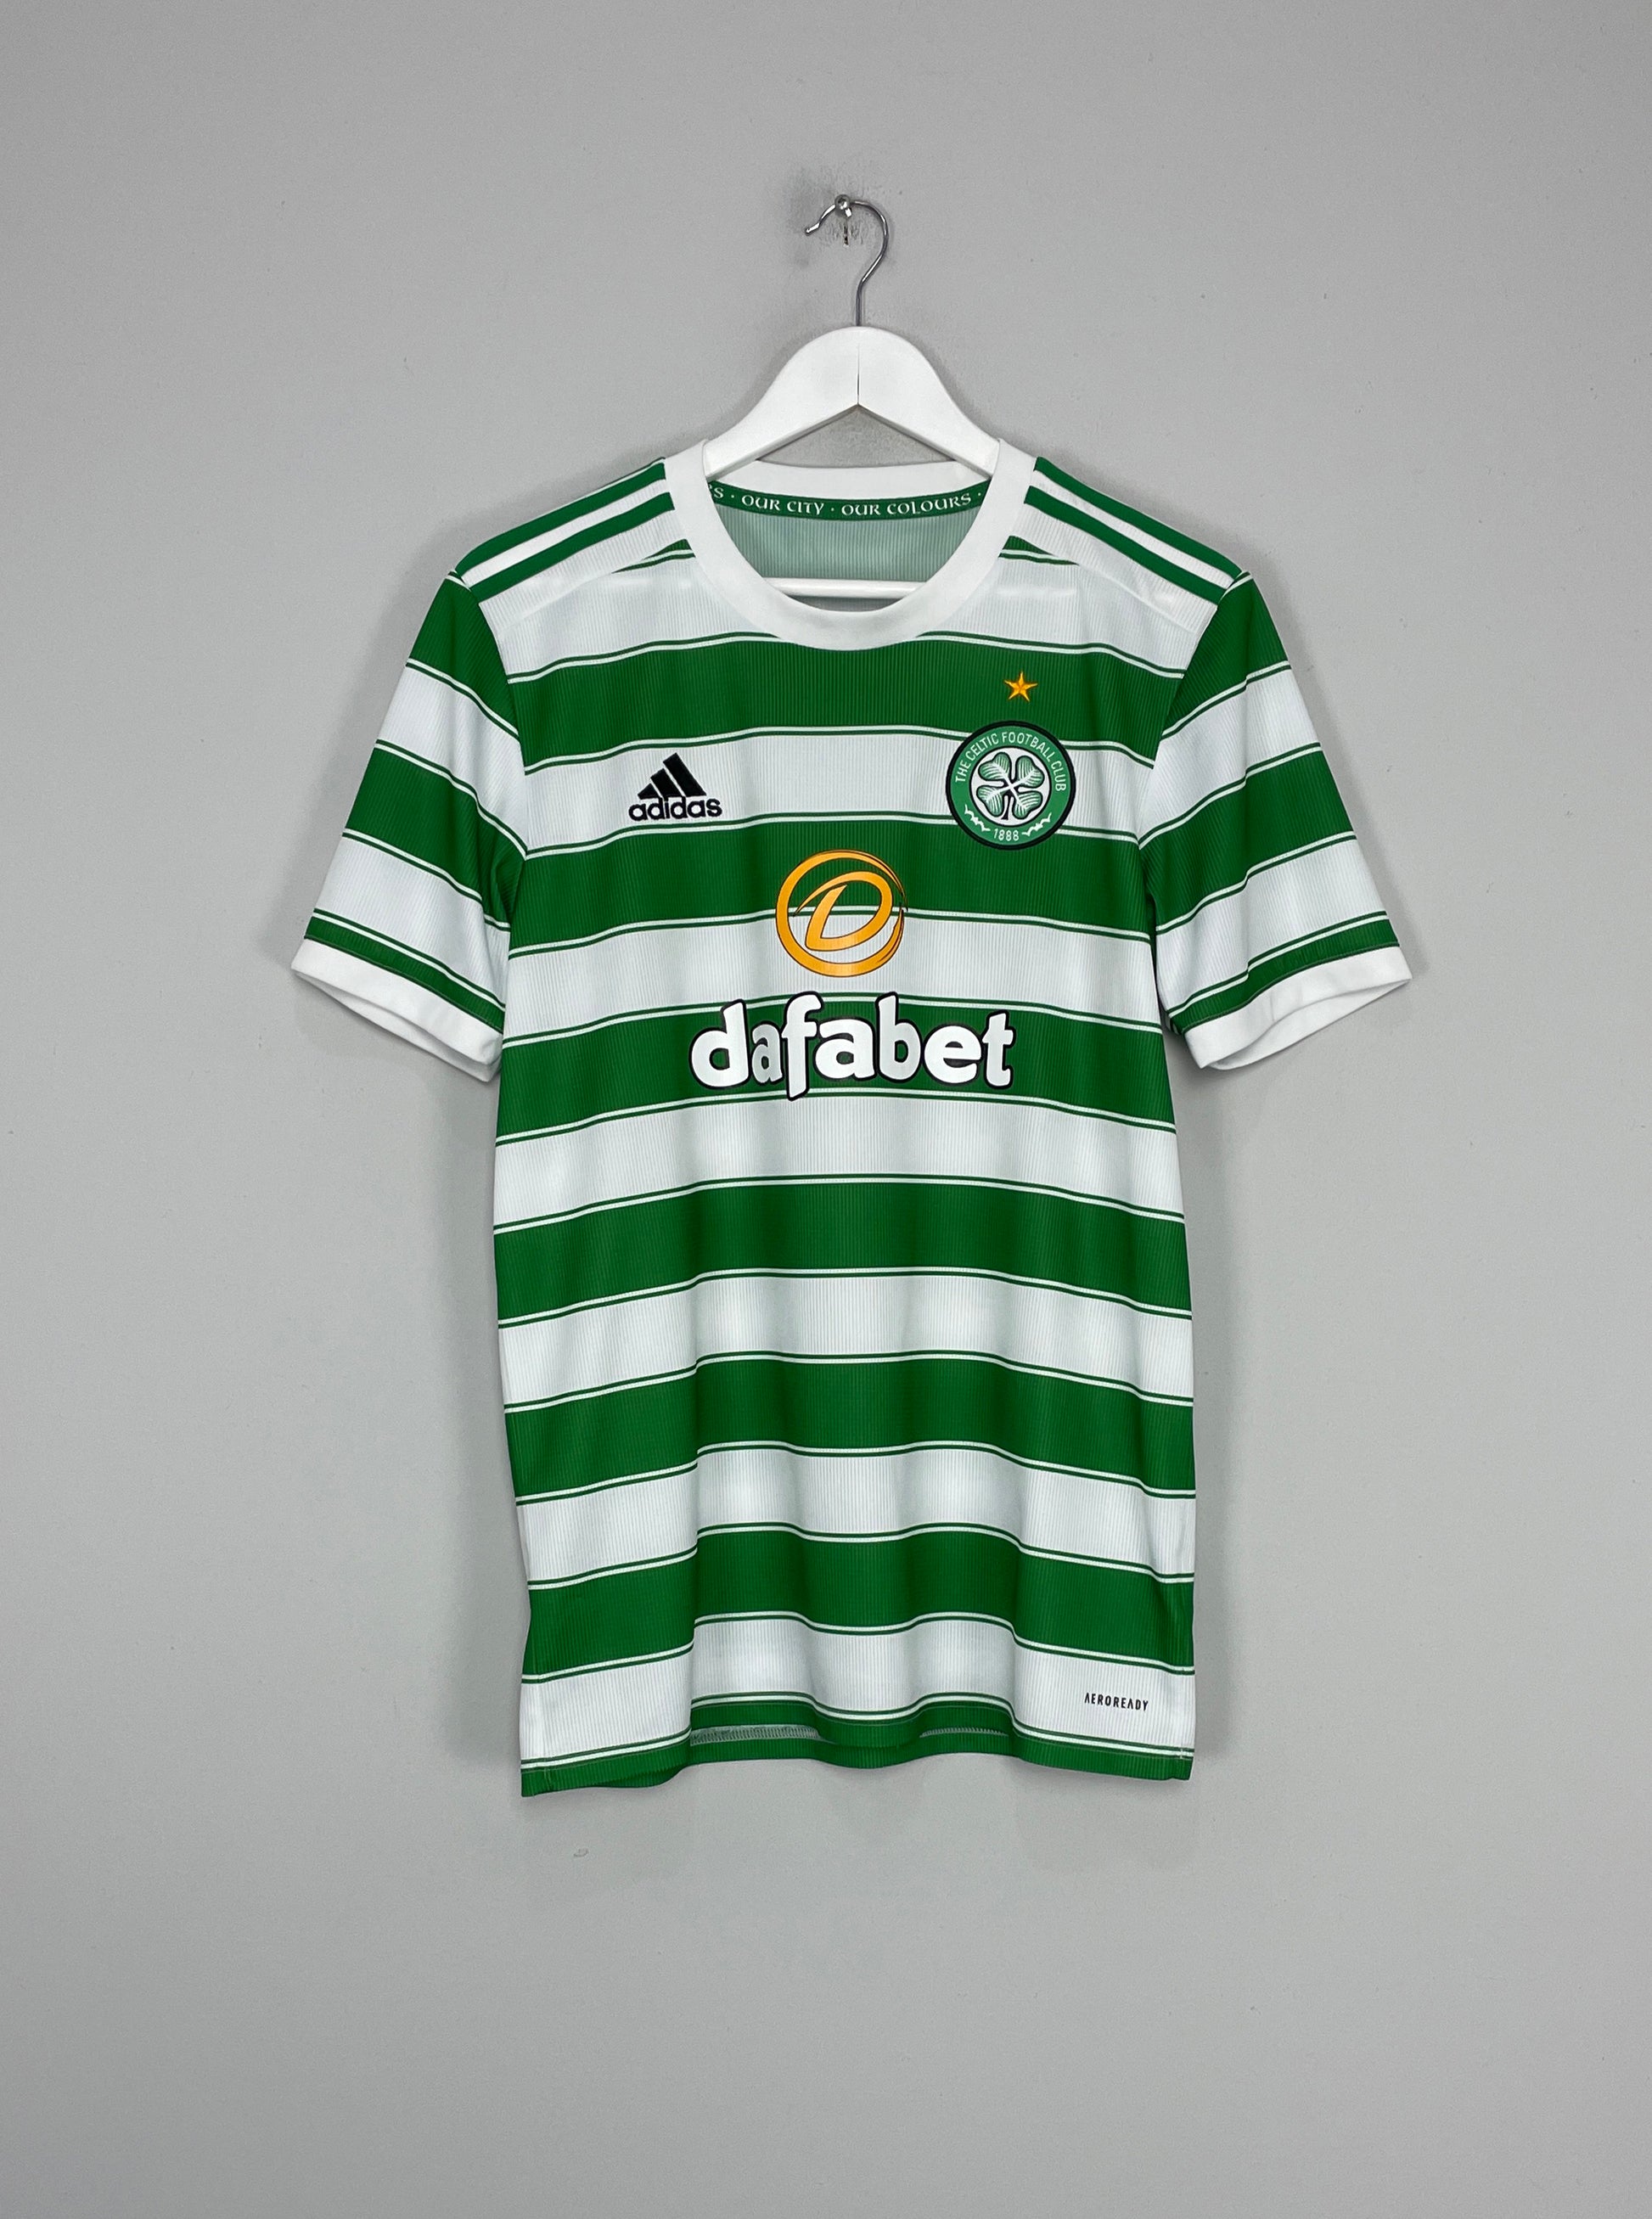 Celtic home shirt 2021/22 revealed and here's when you can buy it